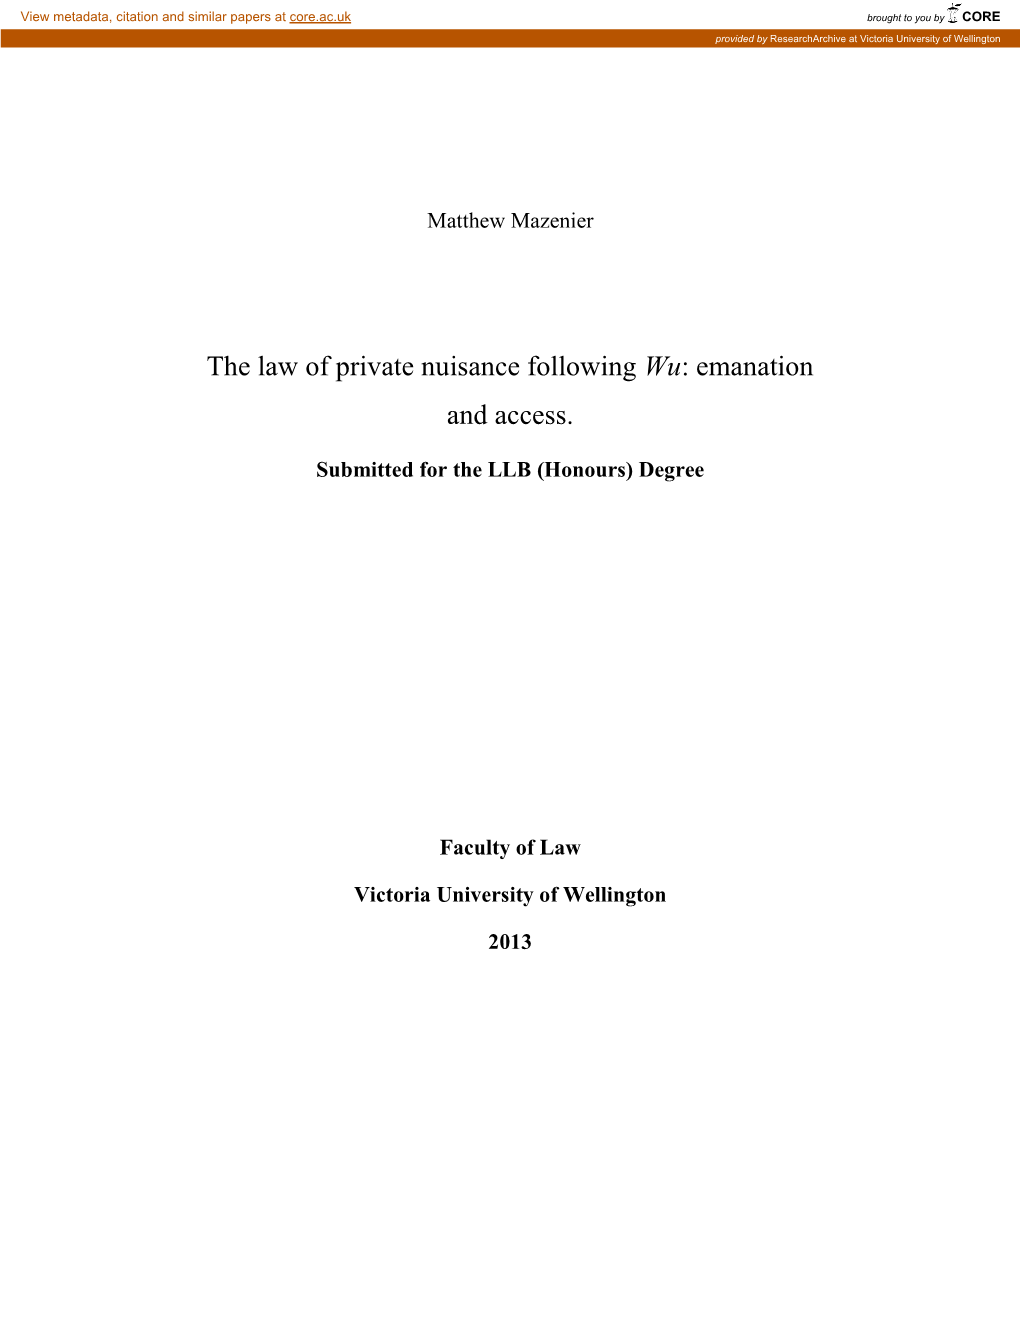 The Law of Private Nuisance Following Wu : Emanation and Access